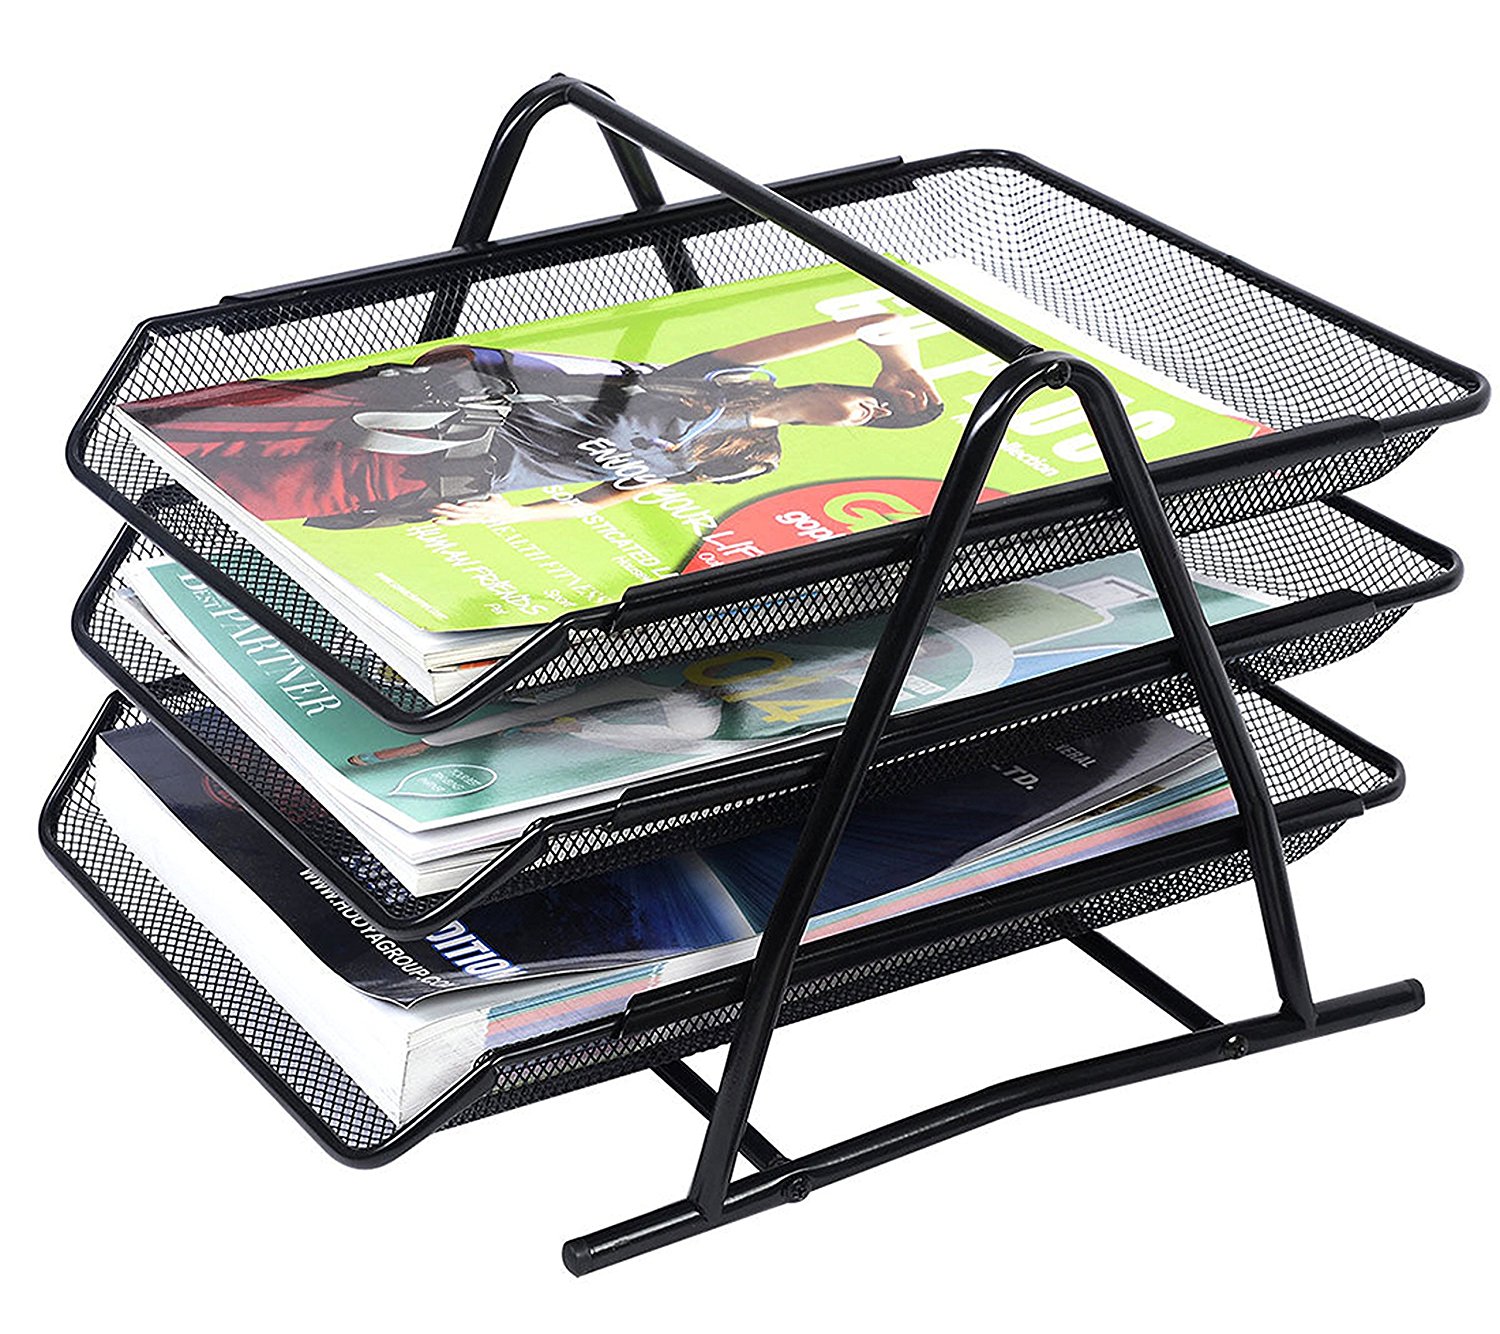 DALTACK Mesh Metal Paper Organizer Letter Tray Desk File Organizer with 5 Tier for Home & Office Black 